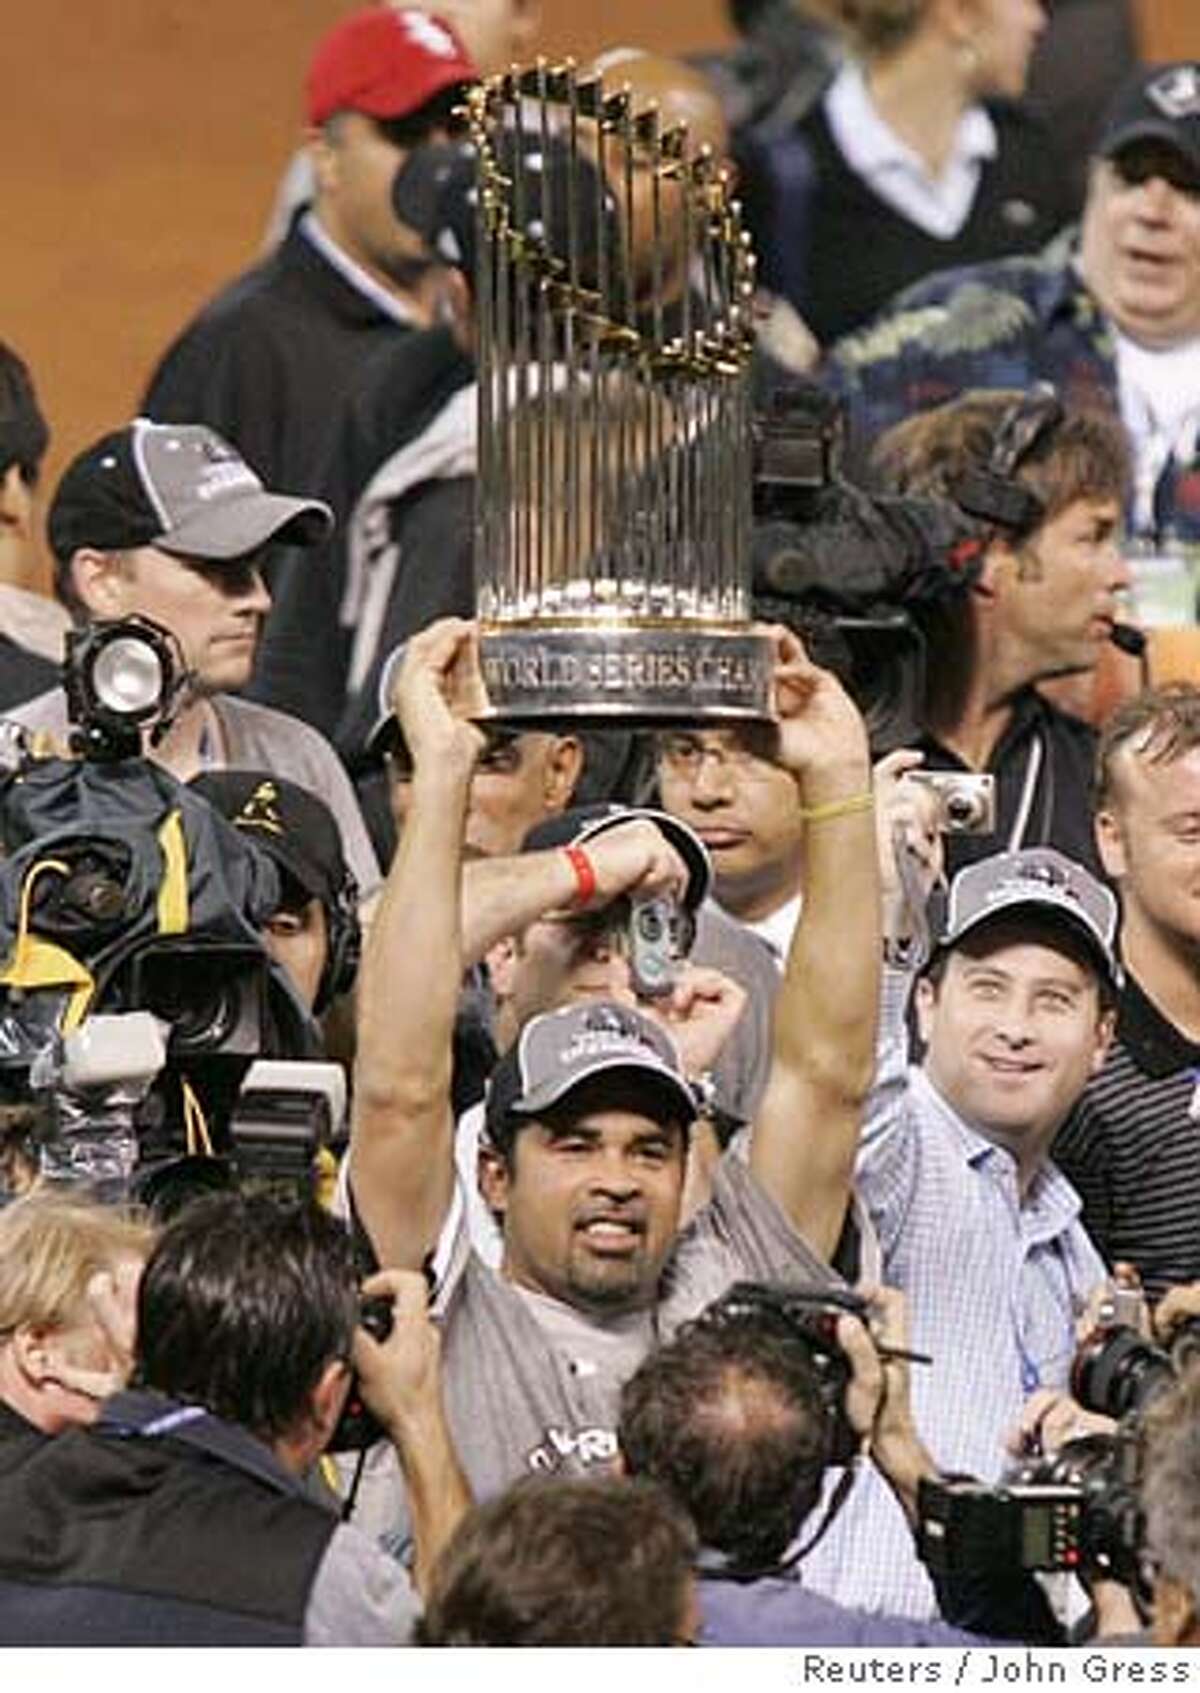 Chicago White Sox manager Ozzie Guillen holds up the World Series trophy during celebrations on the field after the White Sox defeated the Houston Astros 1-0 in Game 4 of Major League Baseball's 2005 World Series in Houston, Texas, October 26, 2005. The White Sox swept the Astros in four games and won their first World Series title since 1917. REUTERS/John Gress 0